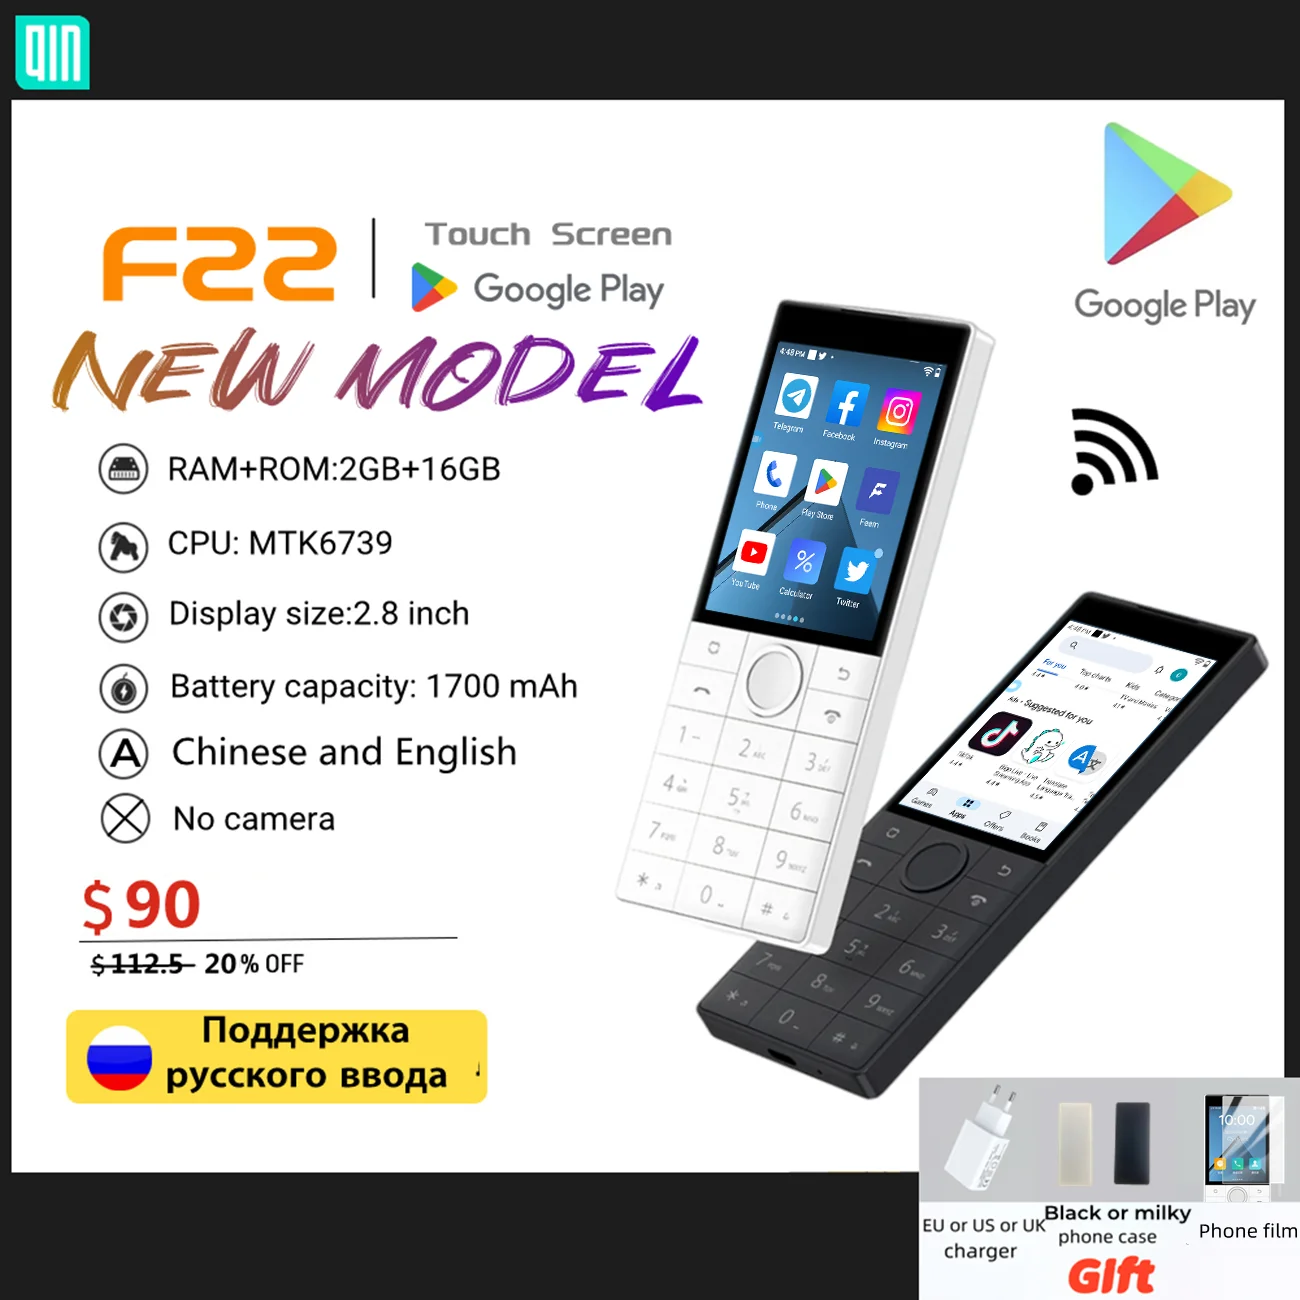 Google Available F22 2+16G 1700mAh 4G MTK6739 Touch Screen Android Smart Phone